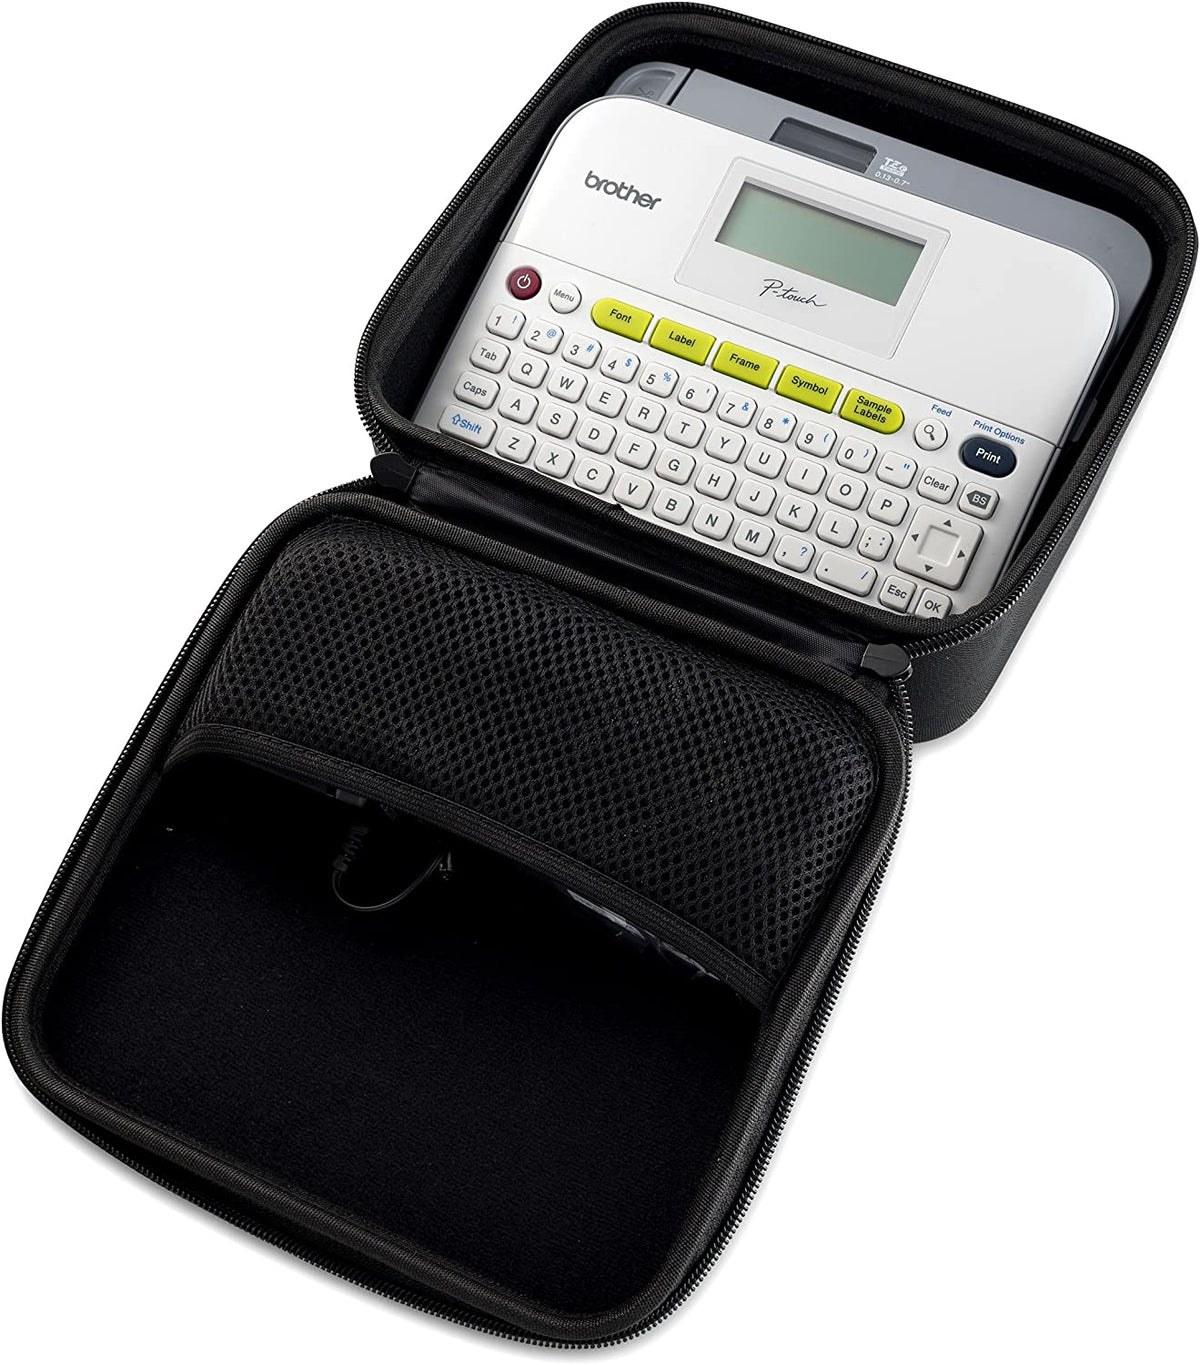 Hard Carry Case Fits Brother P Touch Label Maker PTD400 PTD400AD or PTD450 Carrying Storage Travel Bag Protective Pouch